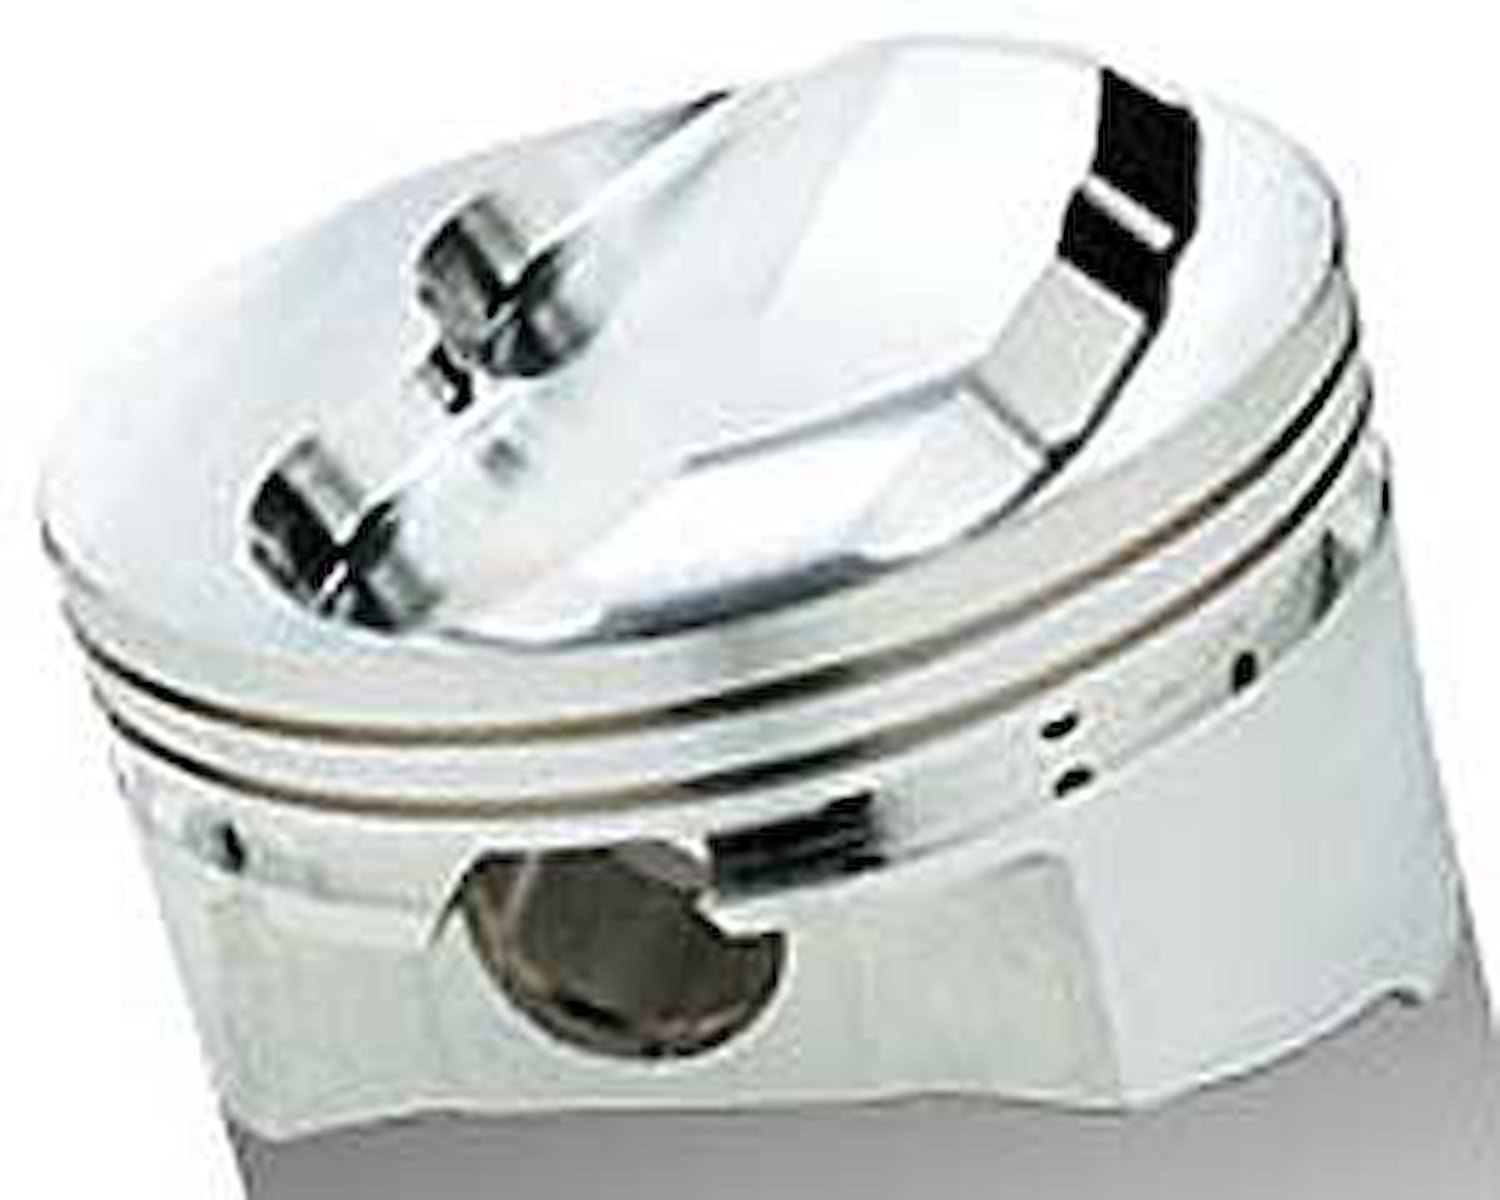 SRP Dome Pistons for Small Block Chevy Bore 400 4.165"